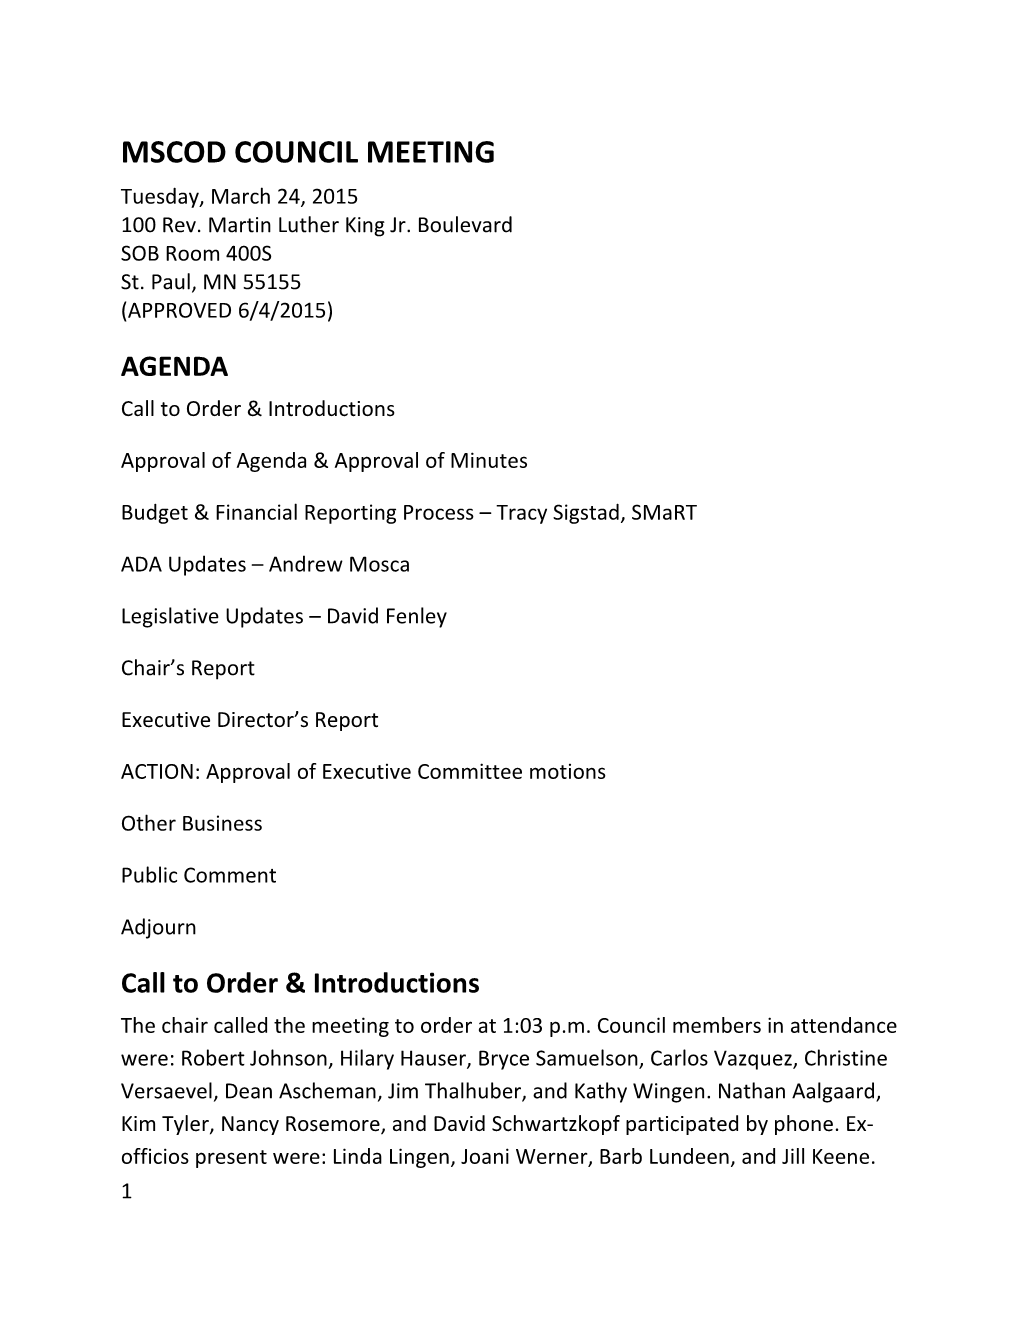 MSCOD Full Council Meeting Minutes, 3/24/2015